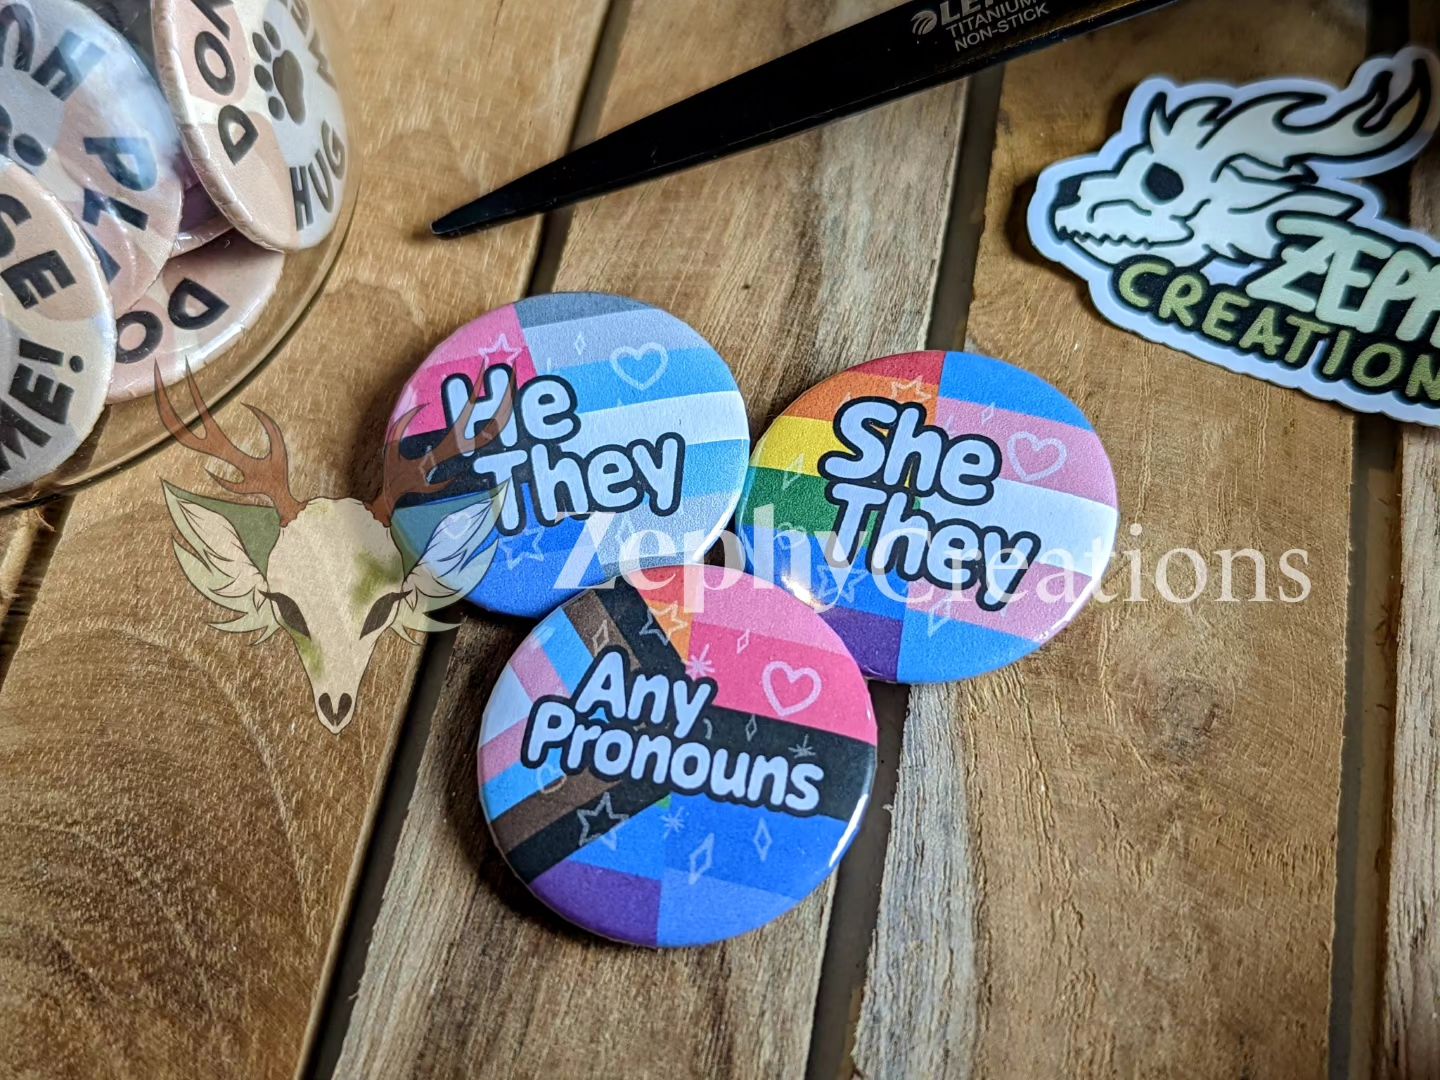 Personalized 38mm pronoun buttons!

Available with any pronouns you want, with one or two flags as background. You can a